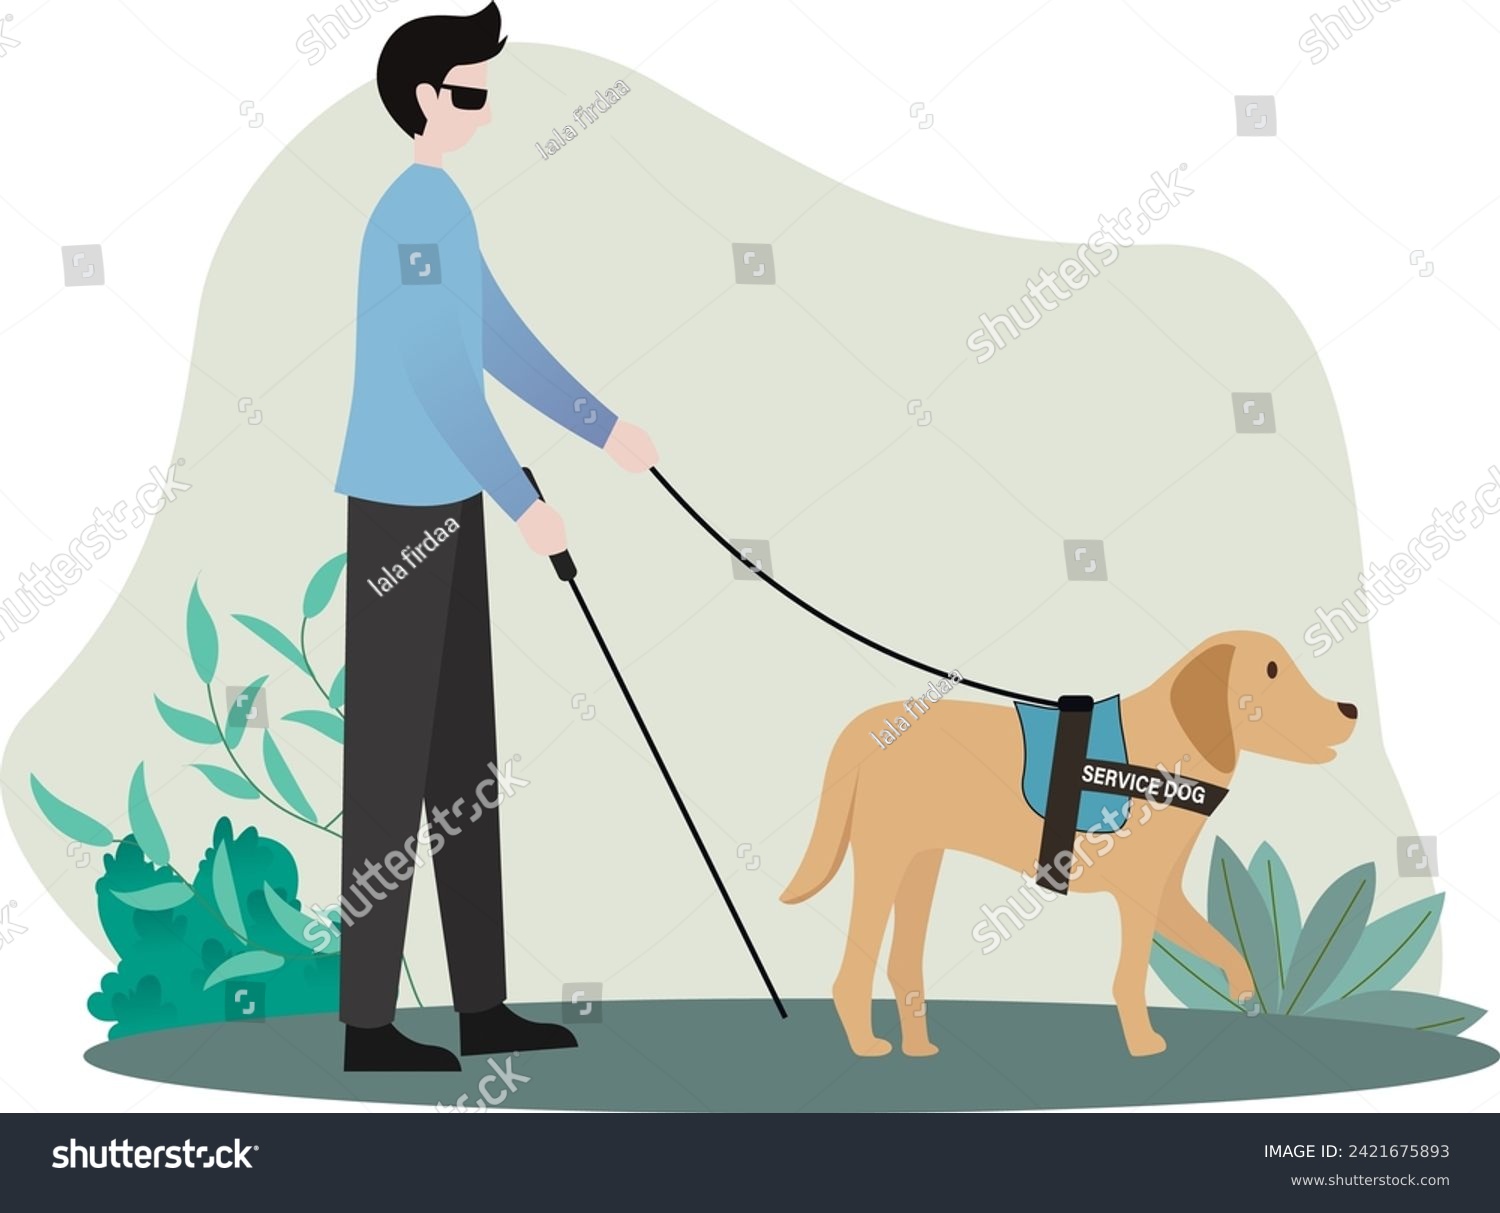 SVG of service dog directs blind man to walk, blind guy with dog guide walking in the park vector illustration, people with disabilities svg